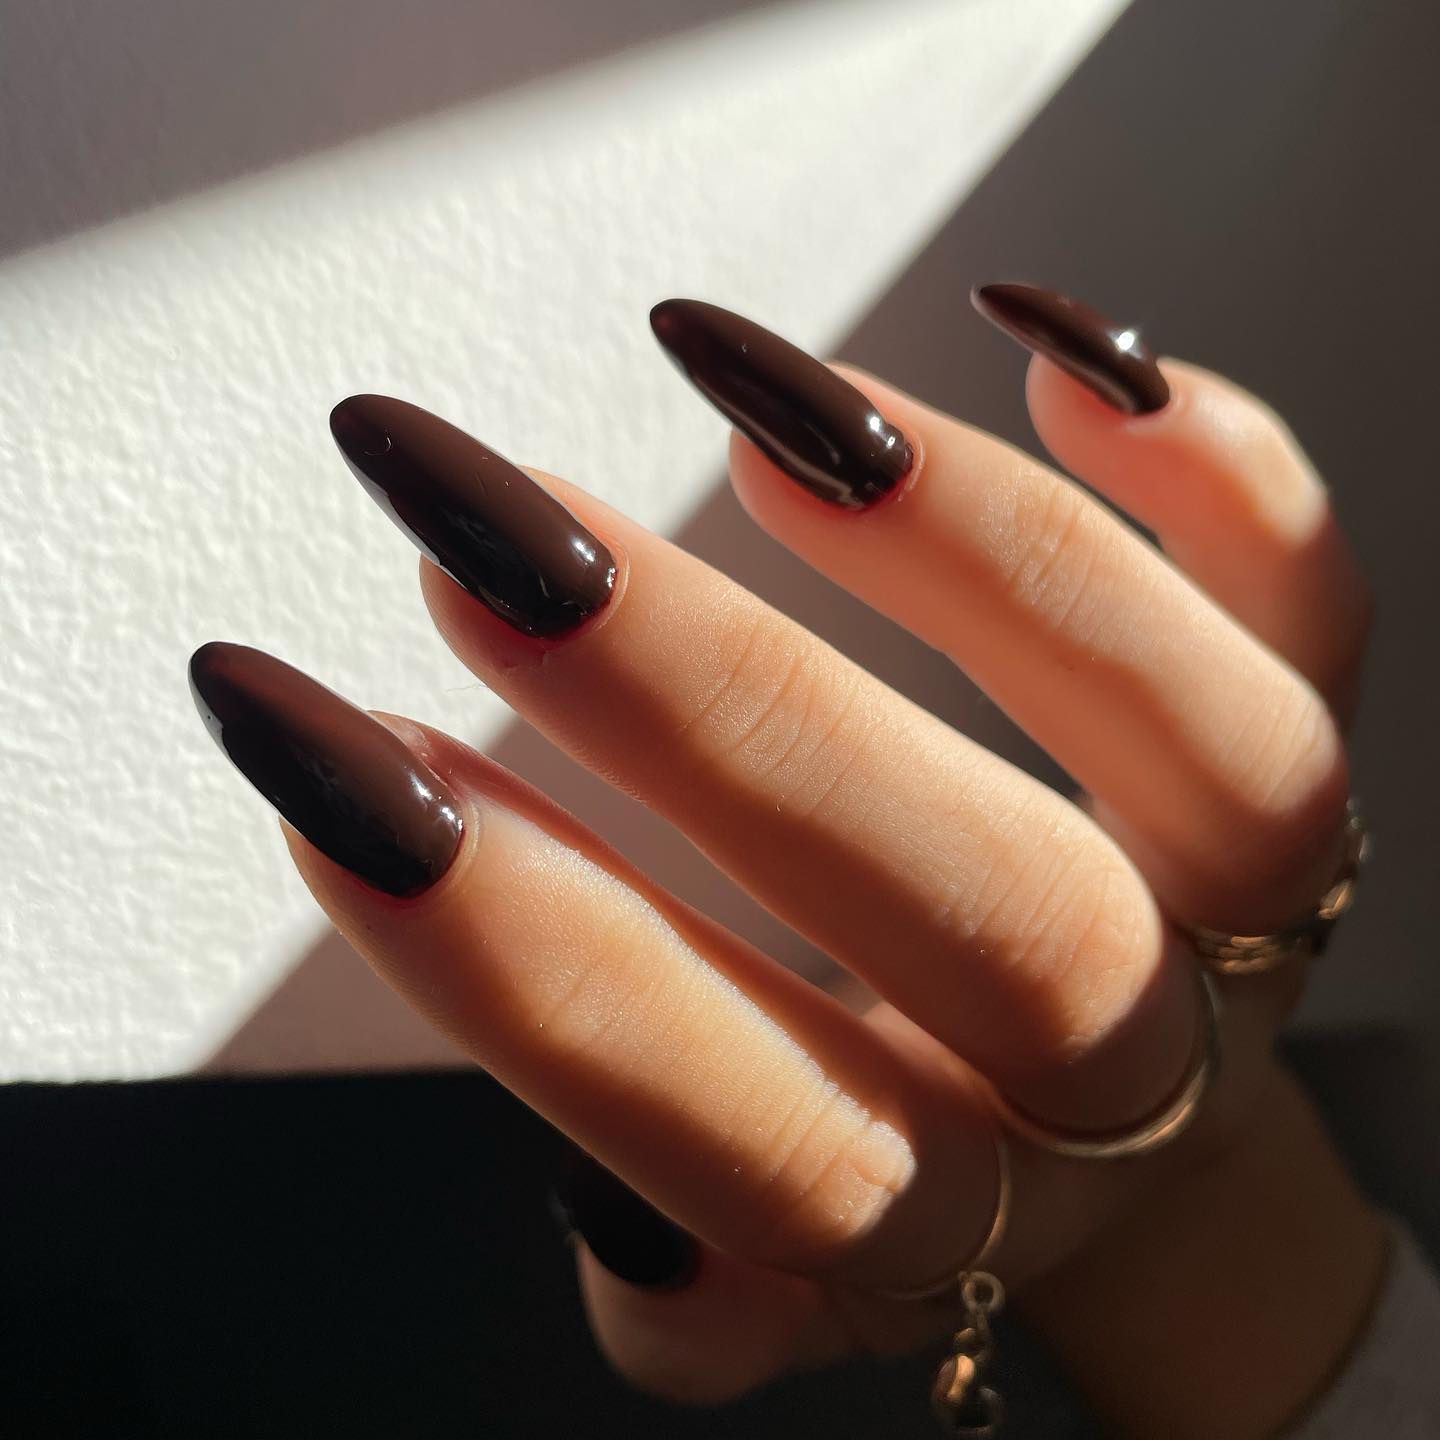 90+ Easy Nails & Nail Art Designs To Try In 2023 images 43